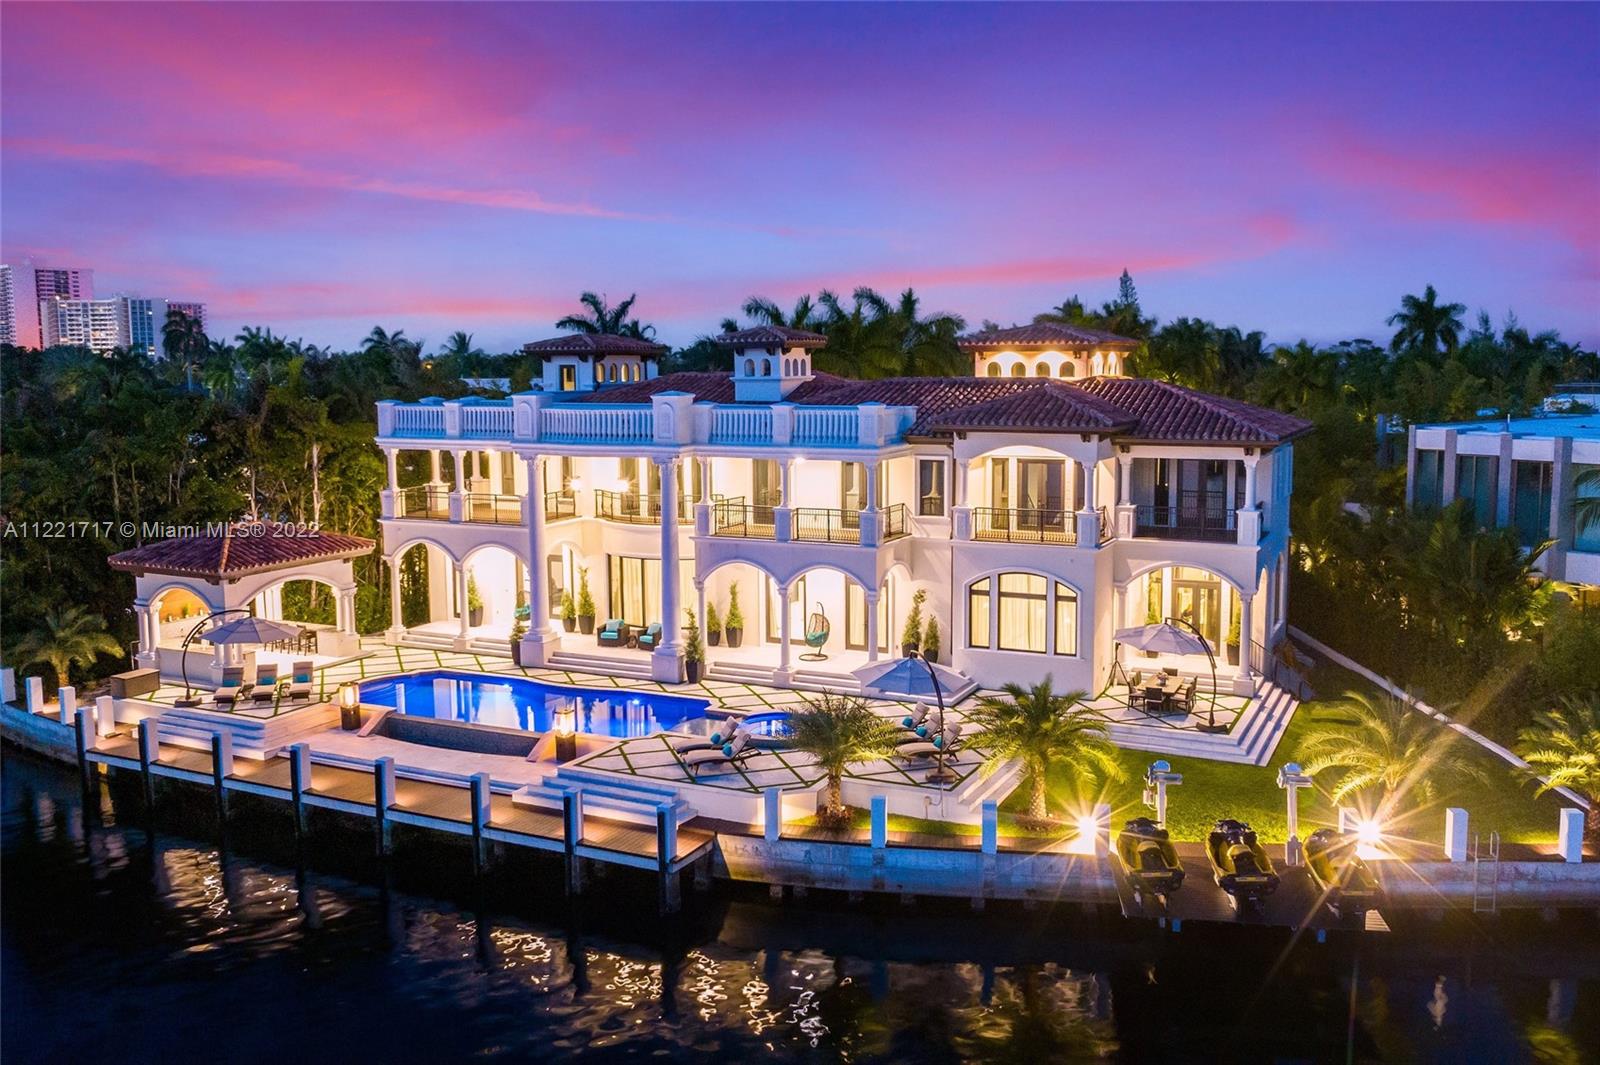 Exuding opulence, this ultra-lavish waterfront palatial estate is set behind private gates at the end of a cul de sac. Boasting 9,327 SF sitting on a 19,082 SF lot offering 200’ of WF this smart home is the epitome of sophistication. The living spaces include a movie theatre, rooftop terrace, 5 balconies, elevator, formal dining room, living, family & lounge areas all offering views of the water, maid’s quarters, kosher kitchen w/ top-of-the-line appliances. Primary suite offers dual walk-in closets & bathrooms complete w/ a terrace. Surrounded by open intracoastal views, infinity saltwater pool, spa, manicured landscaping, private dock, the outdoor space is like no other. This luxurious retreat captures the magic of Golden Beach living w/ stunning views & artfully designed living spaces.